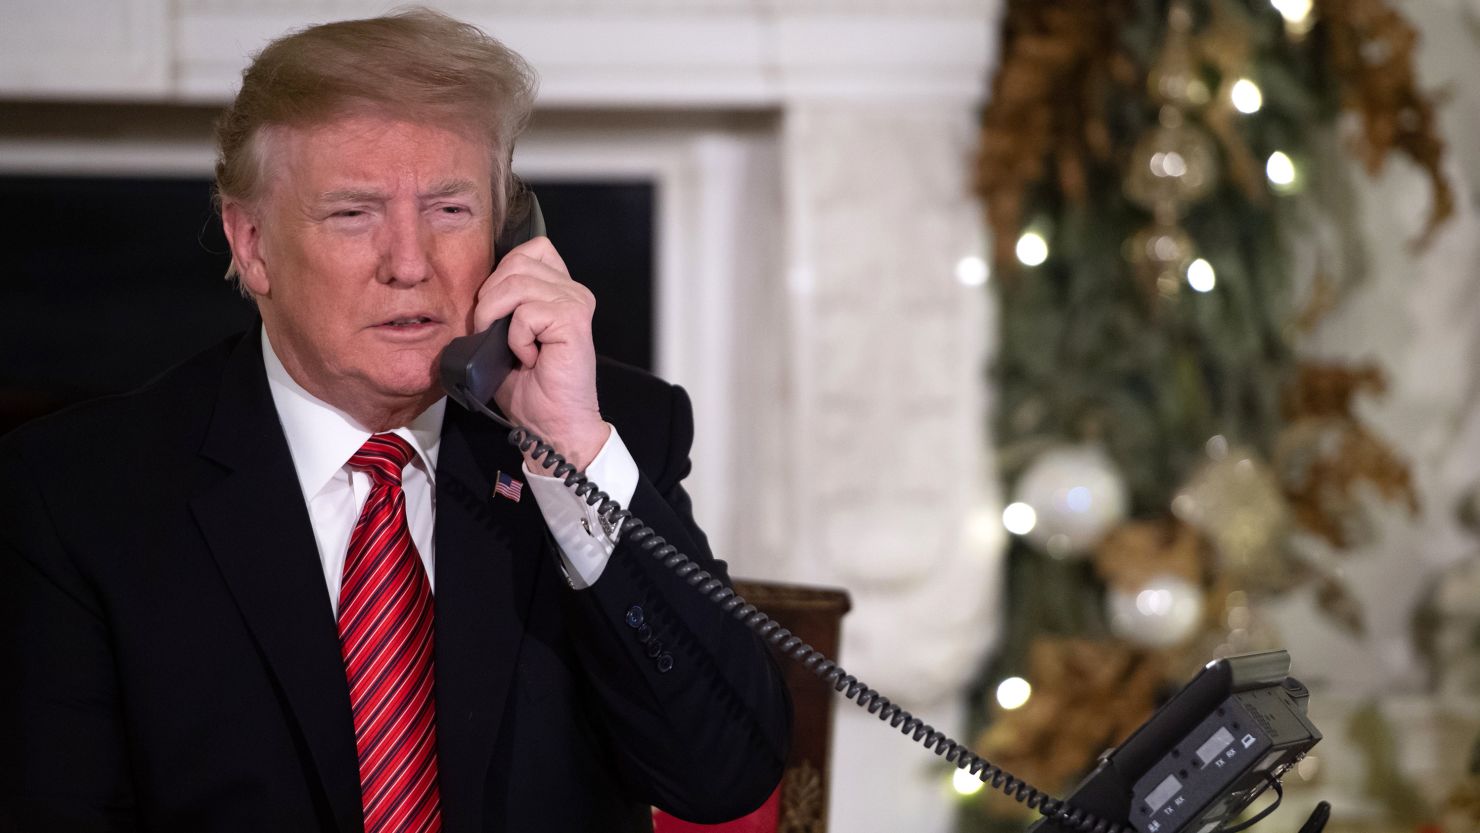 US President Donald Trump speaks on the telephone as he answers calls from people calling into the NORAD Santa tracker phone line in the White House.